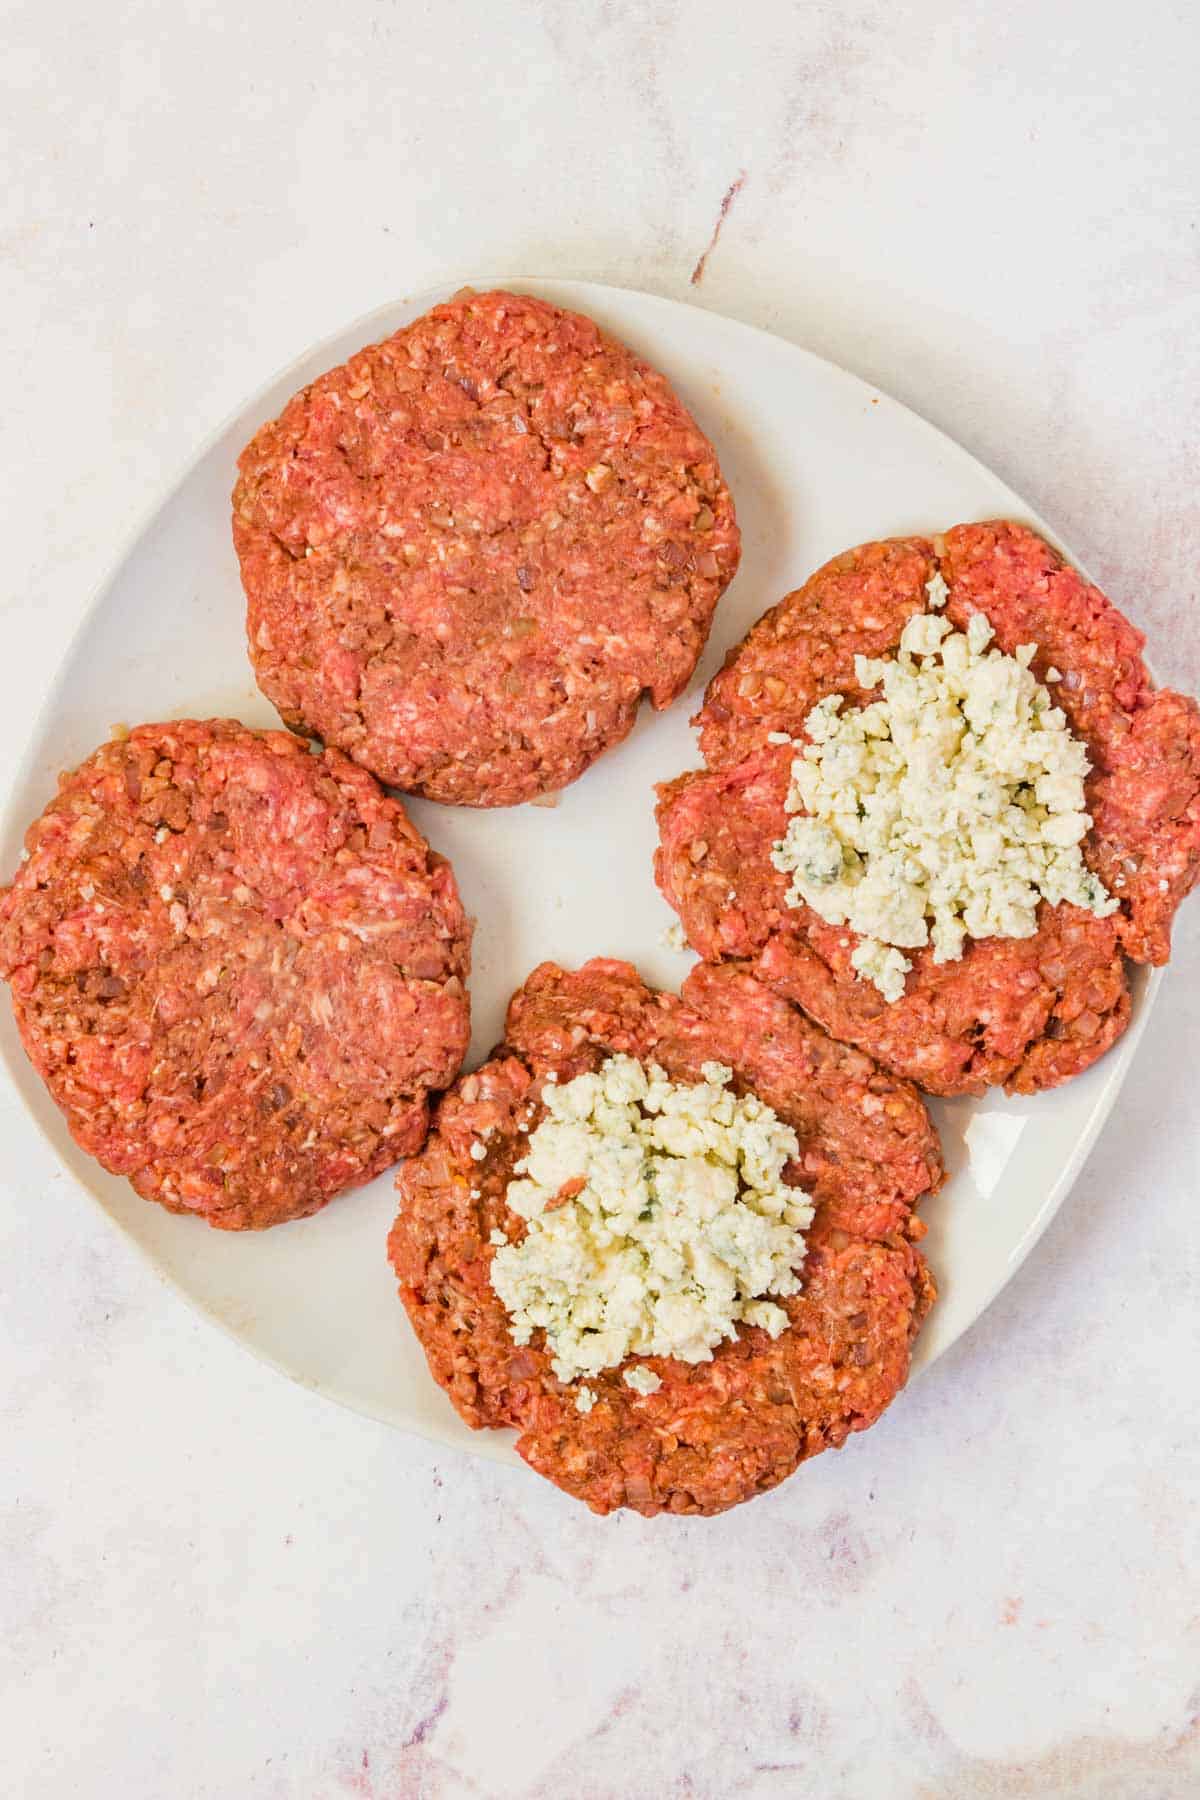 Two fully formed burgers and two with the crumbled blue cheese on the flattened patties.